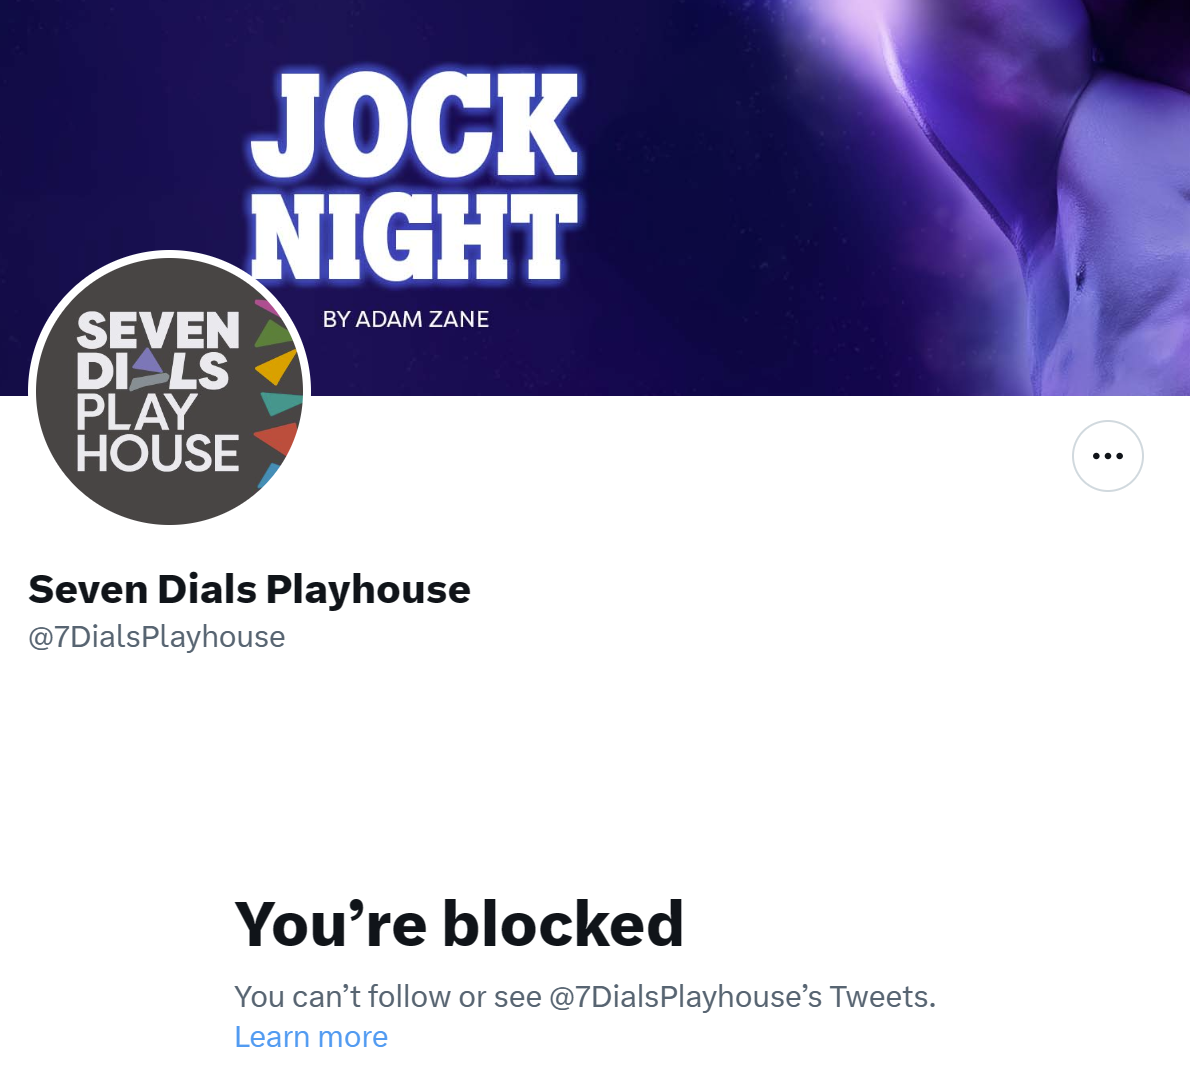 Seven Dials Playhouse
@7DialsPlayhouse

You’re blocked

You can’t follow or see @7DialsPlayhouse’s Tweets.
Learn more